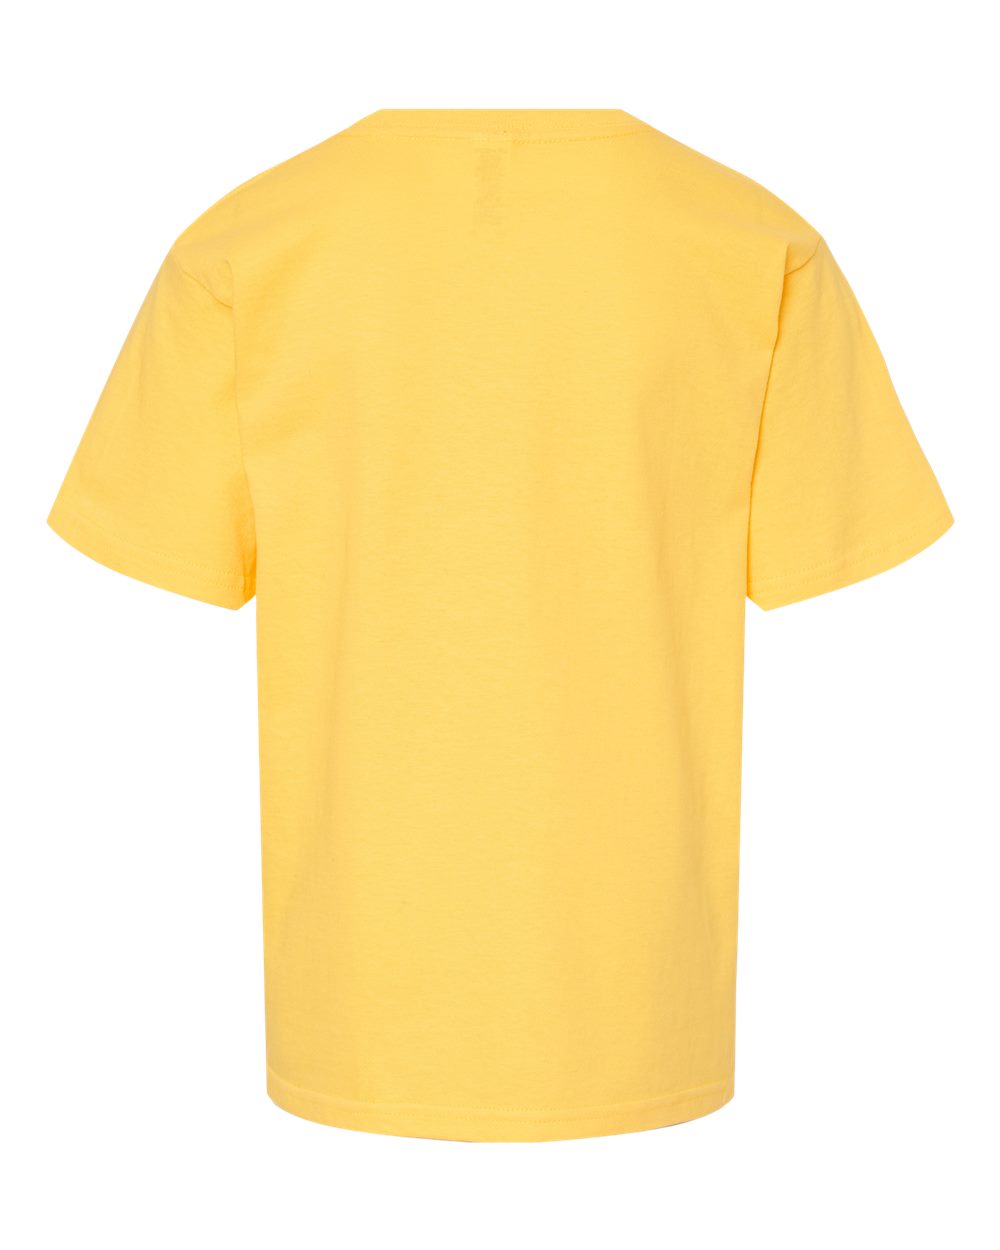 M&O Youth Gold Soft Touch T-Shirt 4850 #color_Yellow